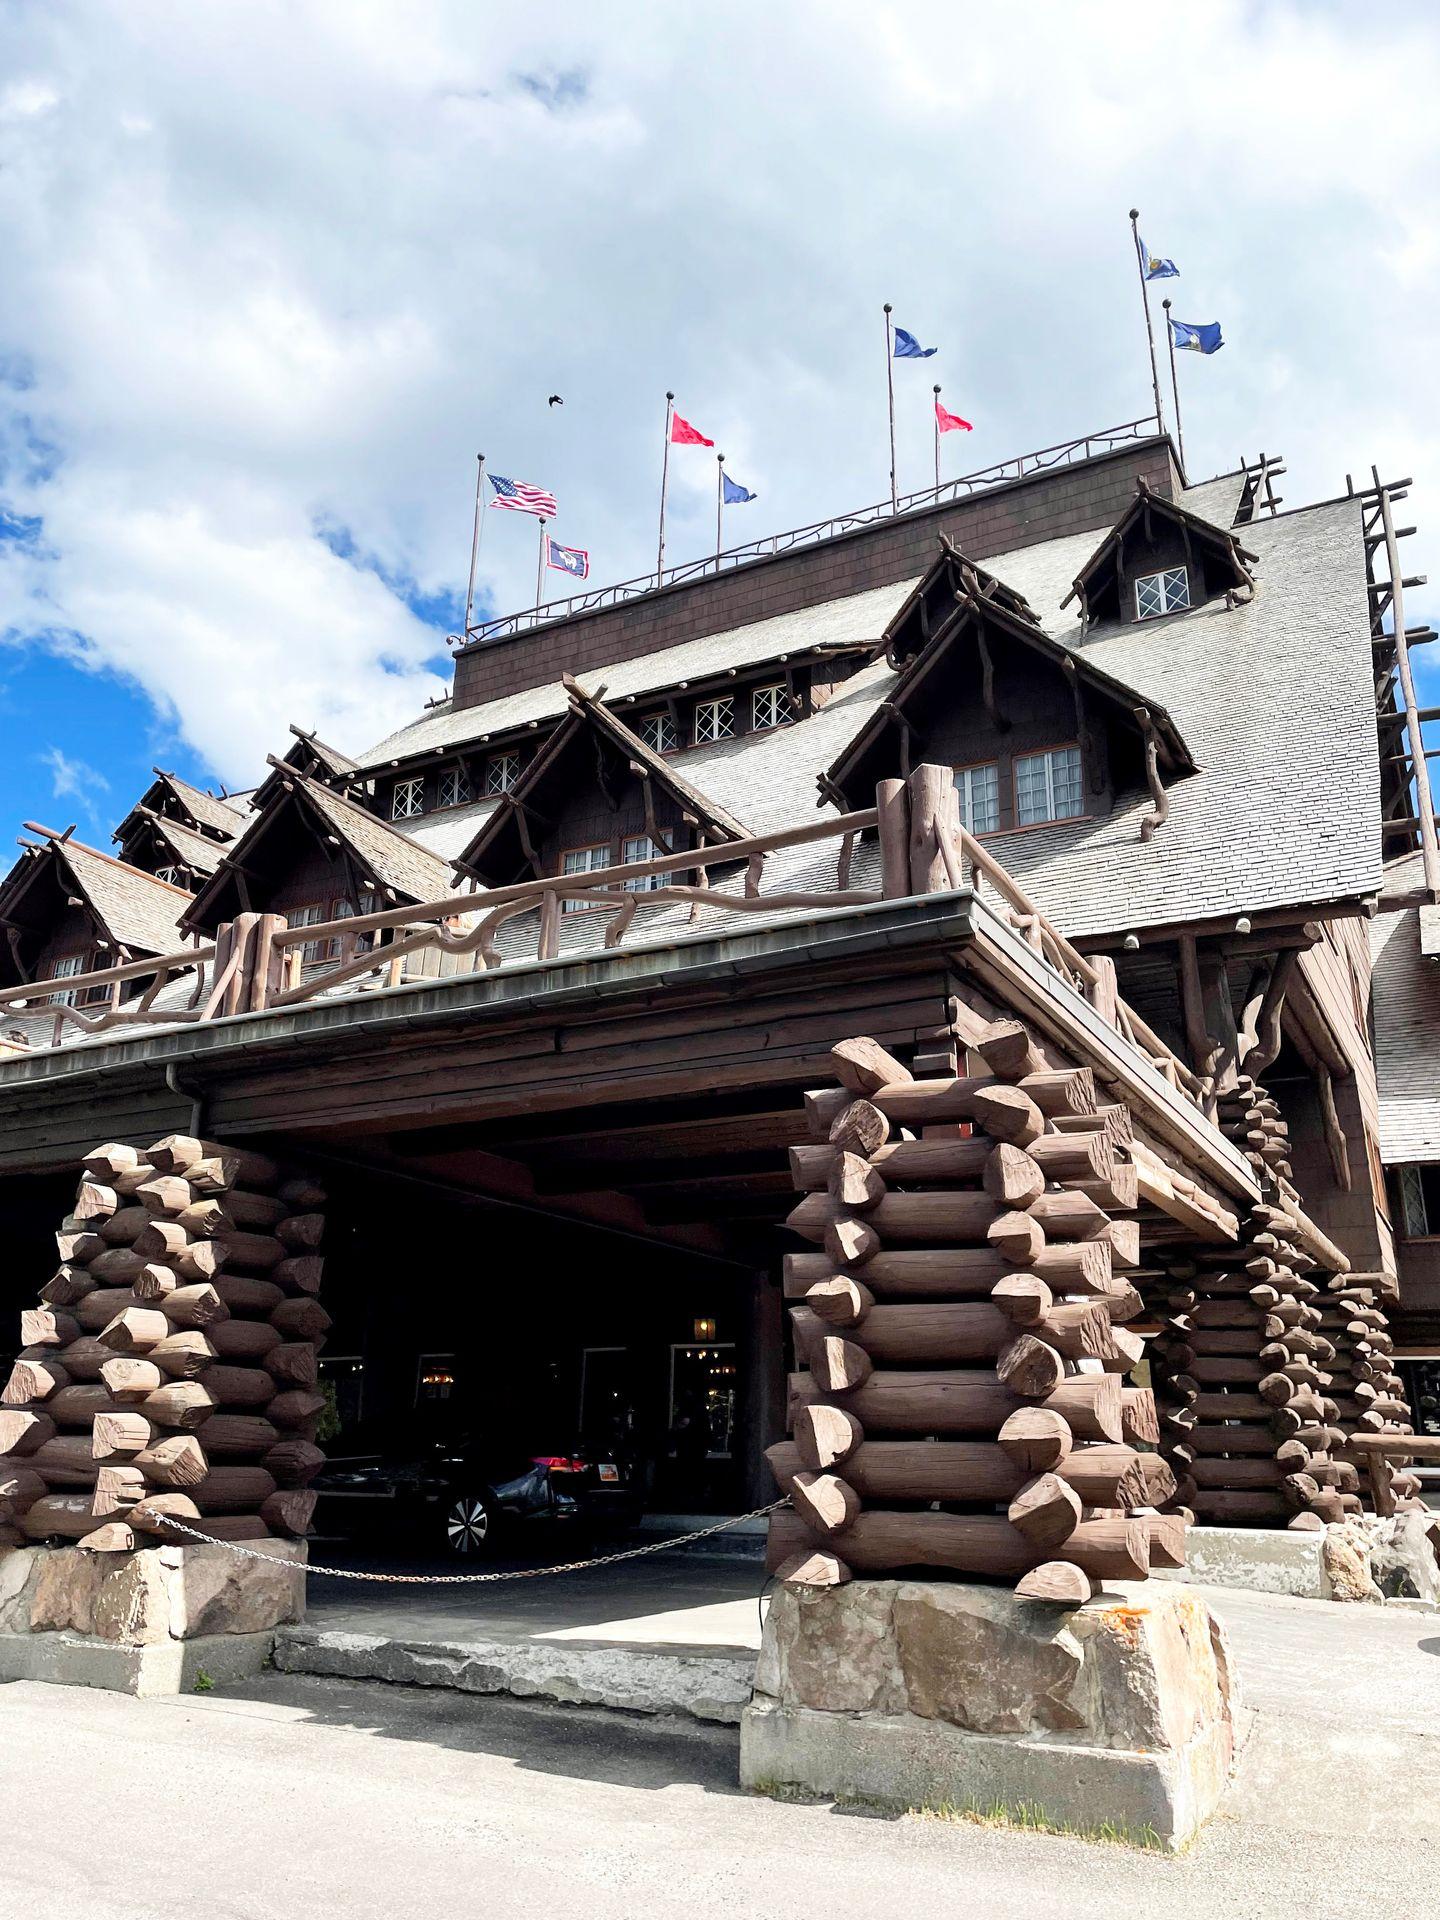 The exterior of Old Faithful Inn which is made up of stacked logs.